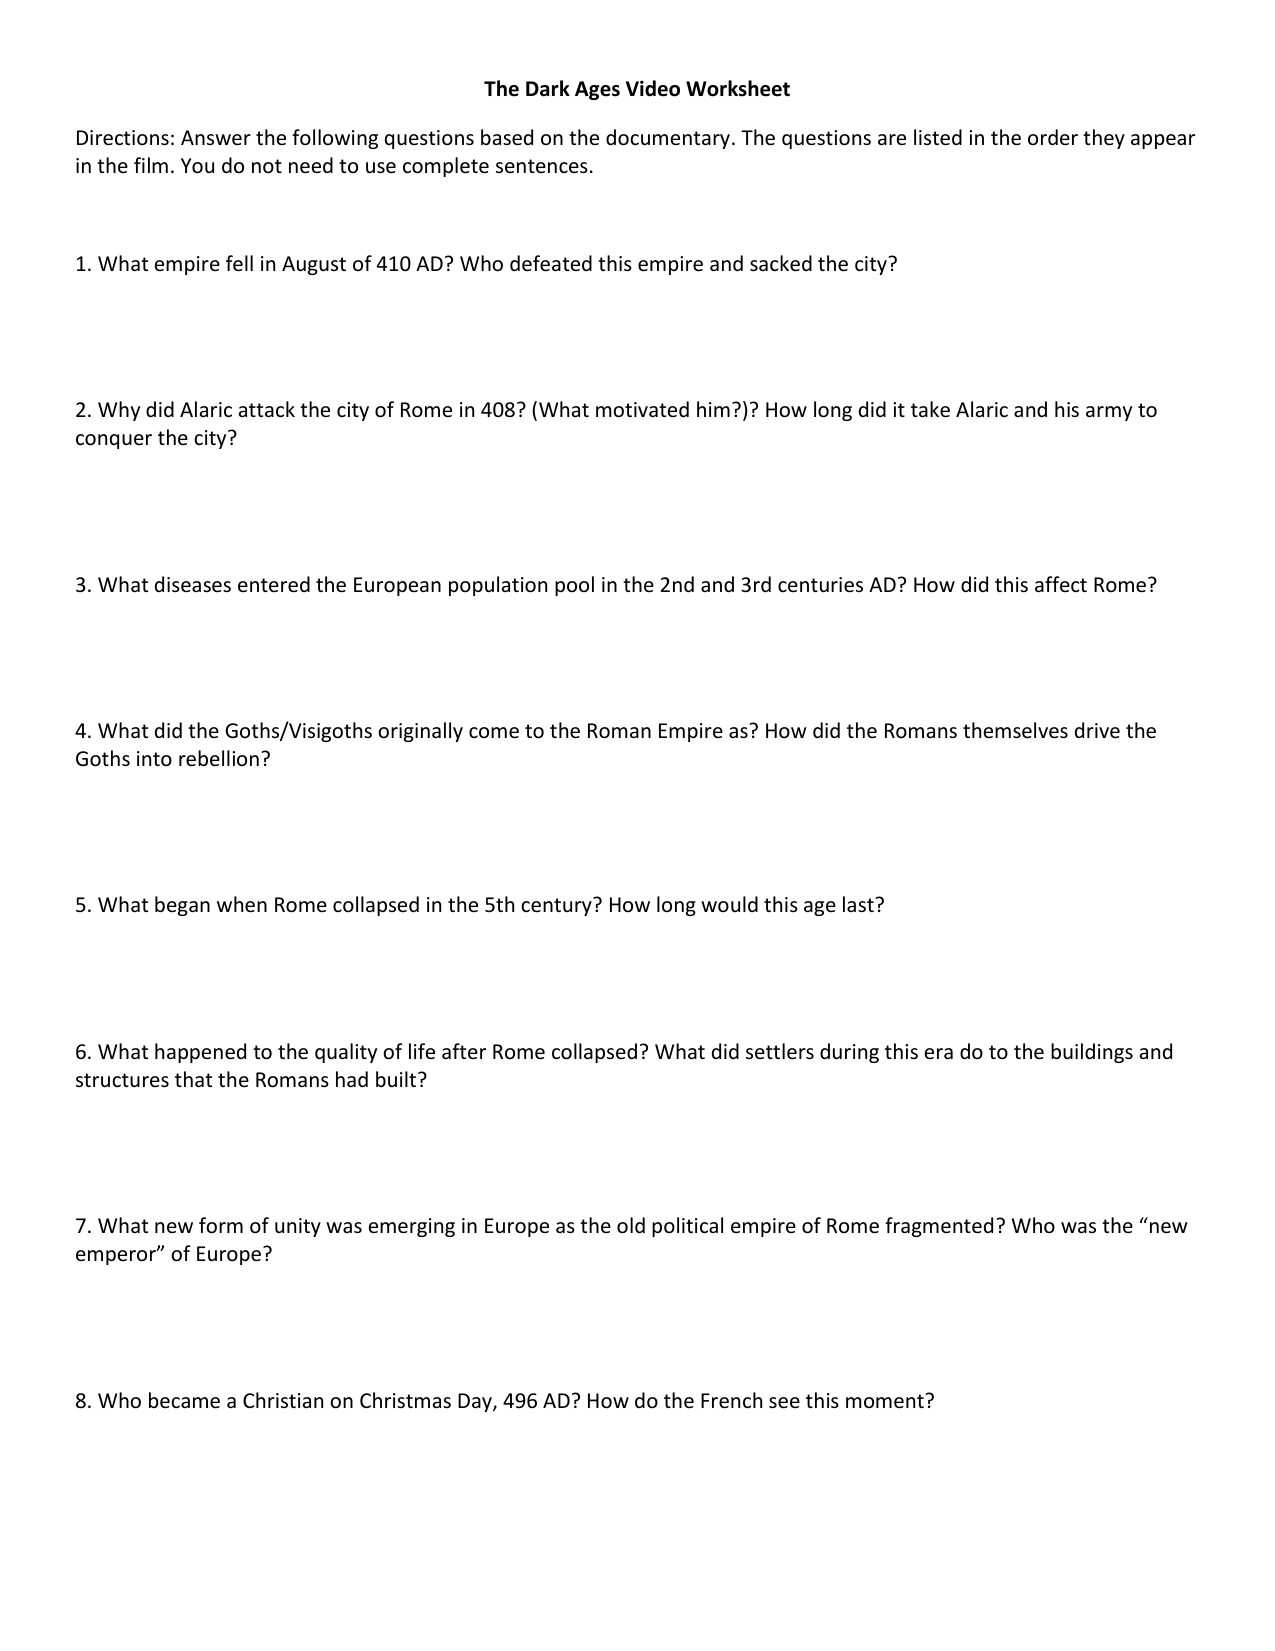 the dark ages history channel worksheet With Regard To The Dark Ages Video Worksheet